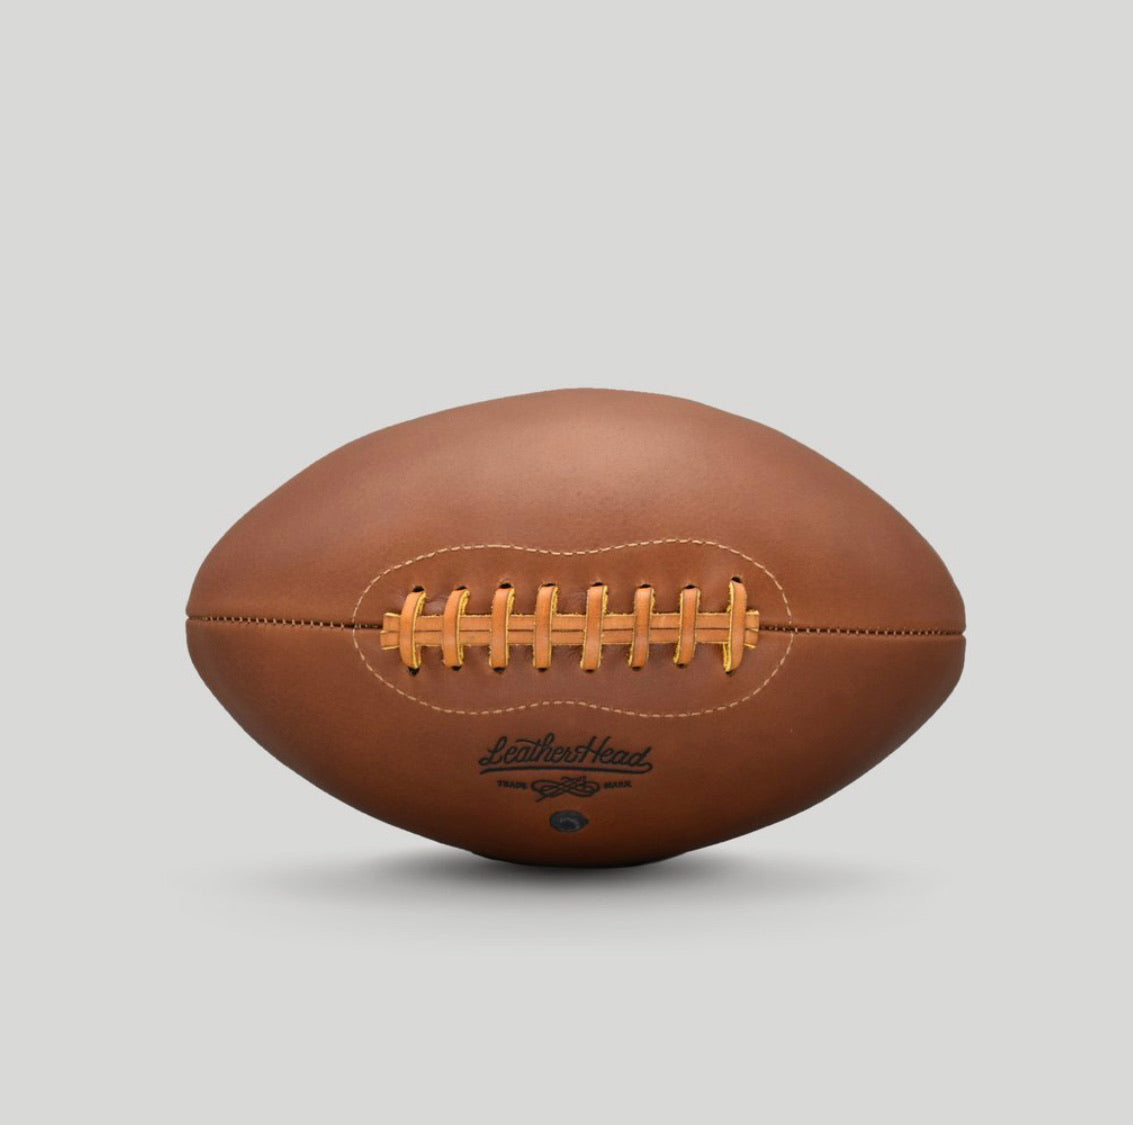 “Old Fashioned” Football by Leather Head Sports